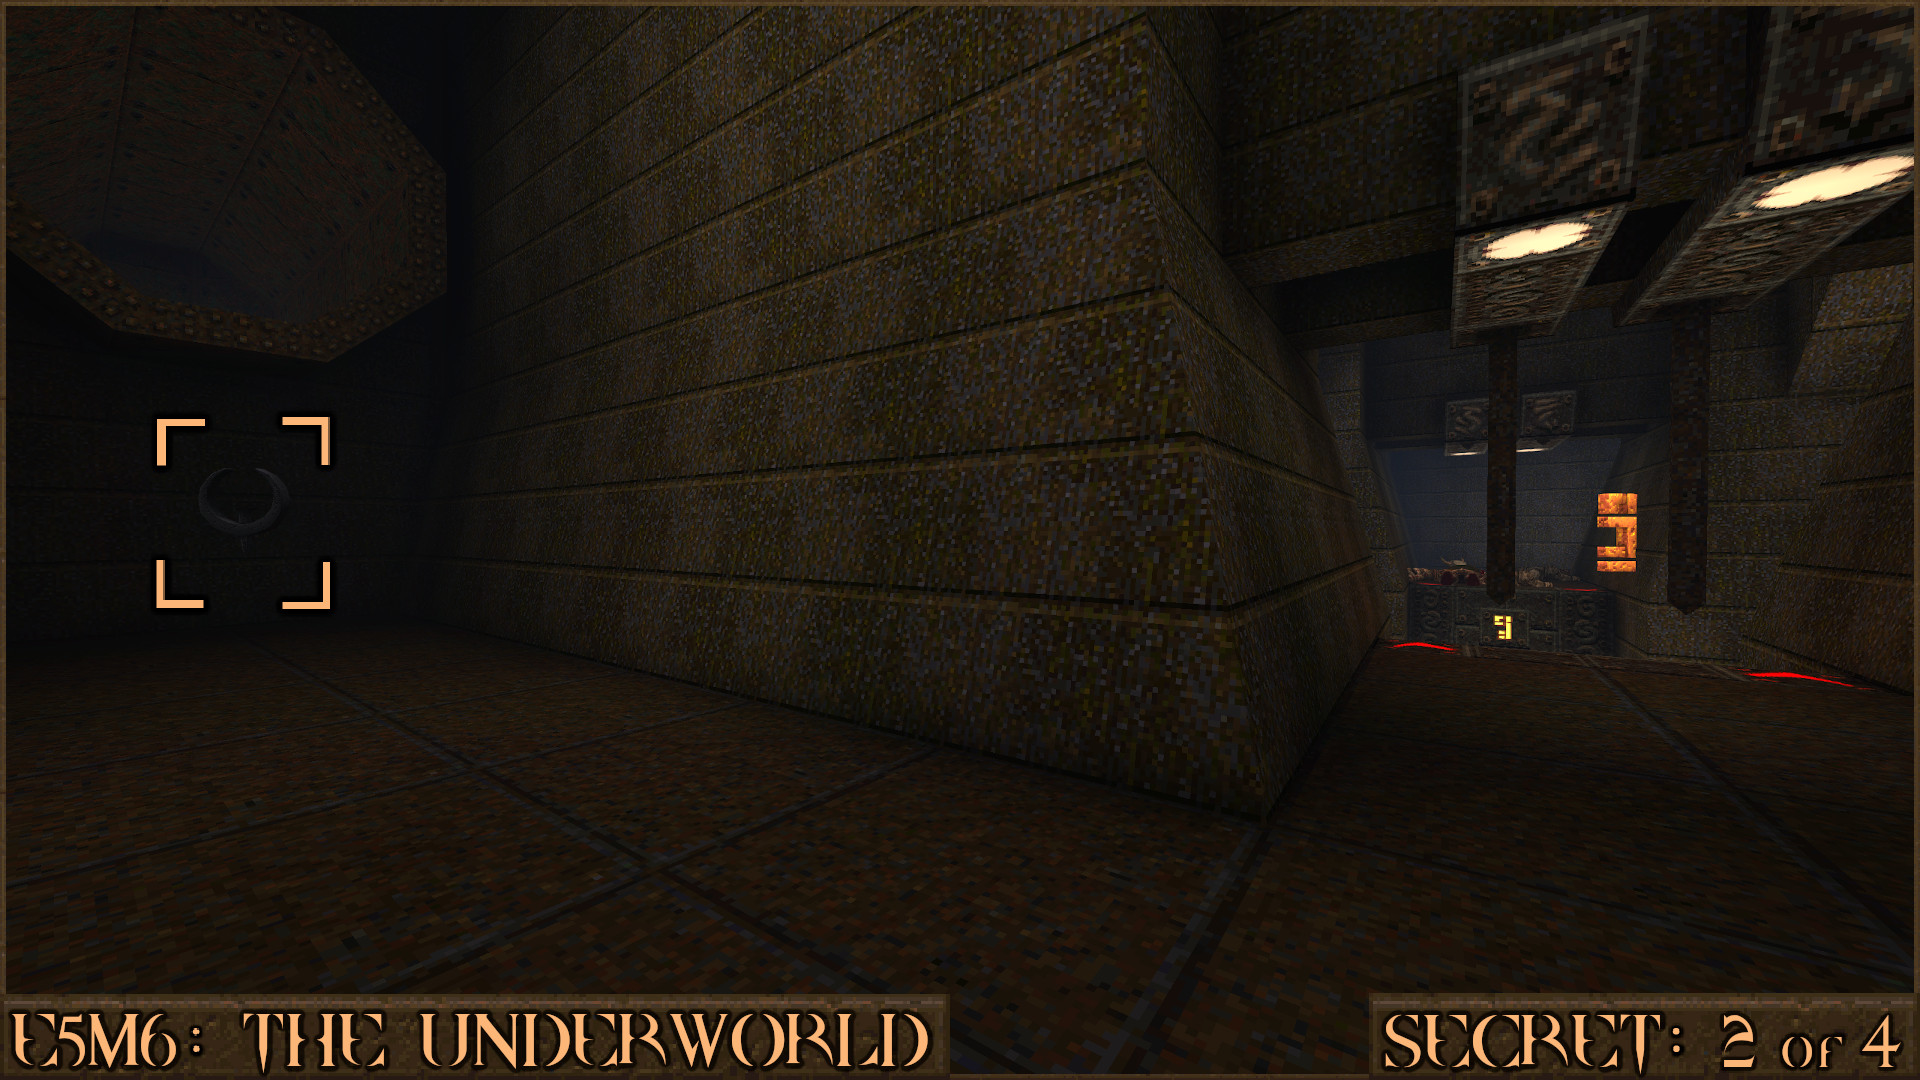 Quake Finding All Secrets in Quake Expansion pack: Dimension of the Past - E5M6: The Underworld - D3F271A